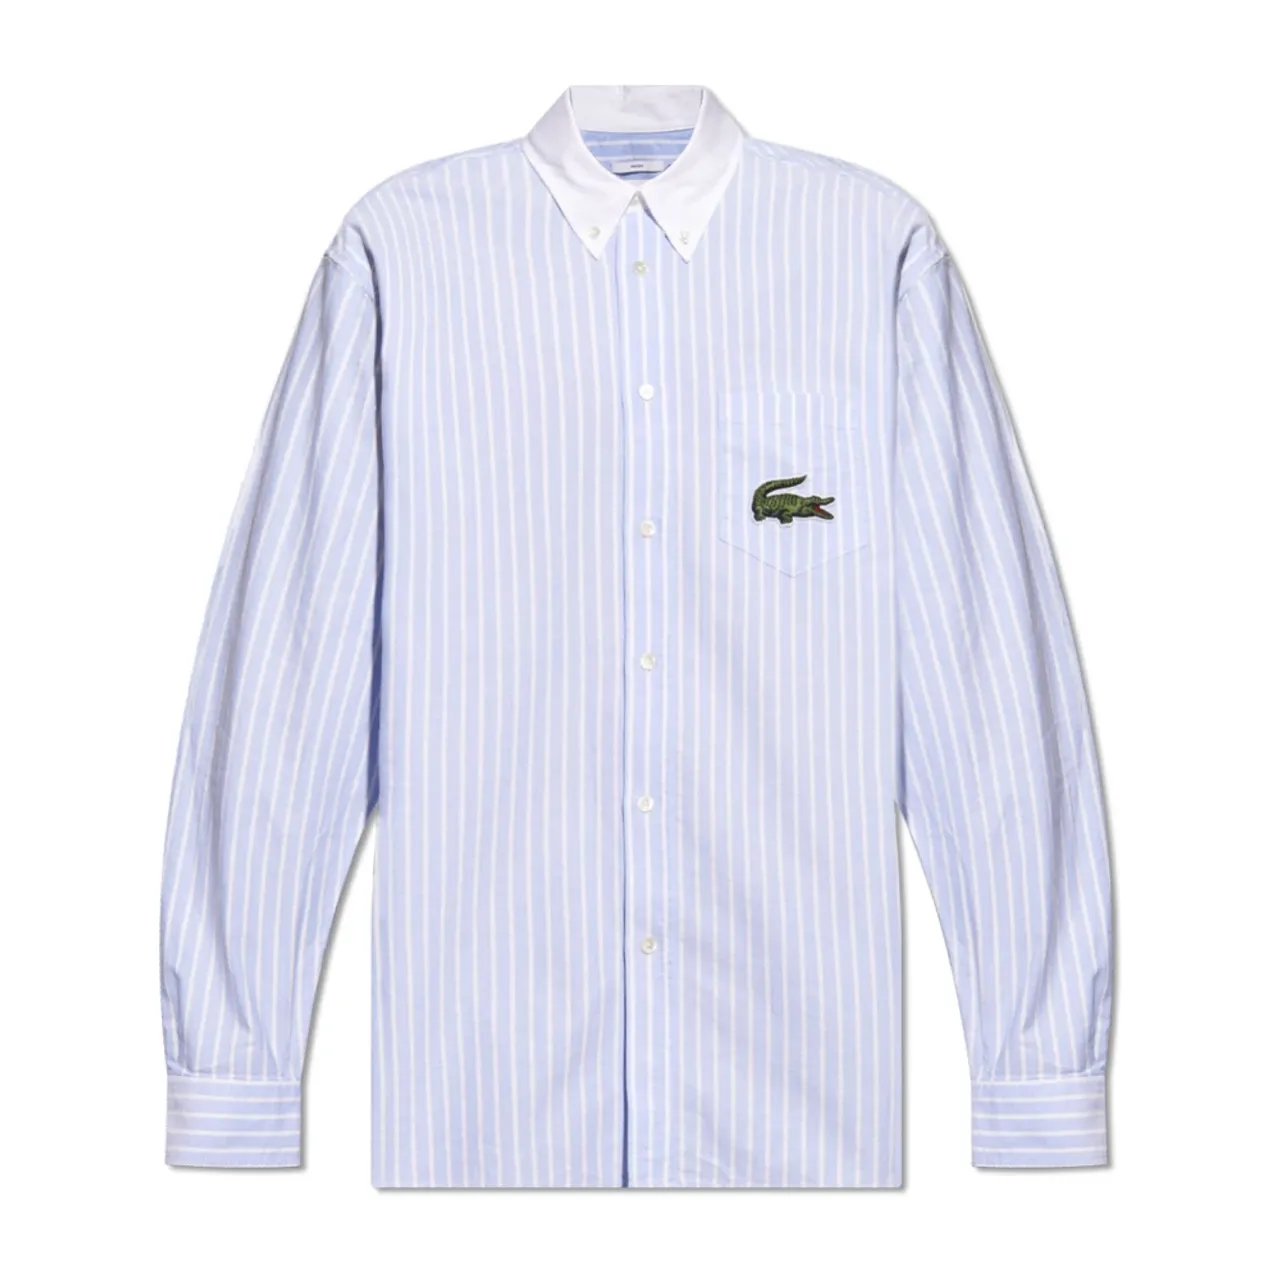 Lacoste - Shirts 